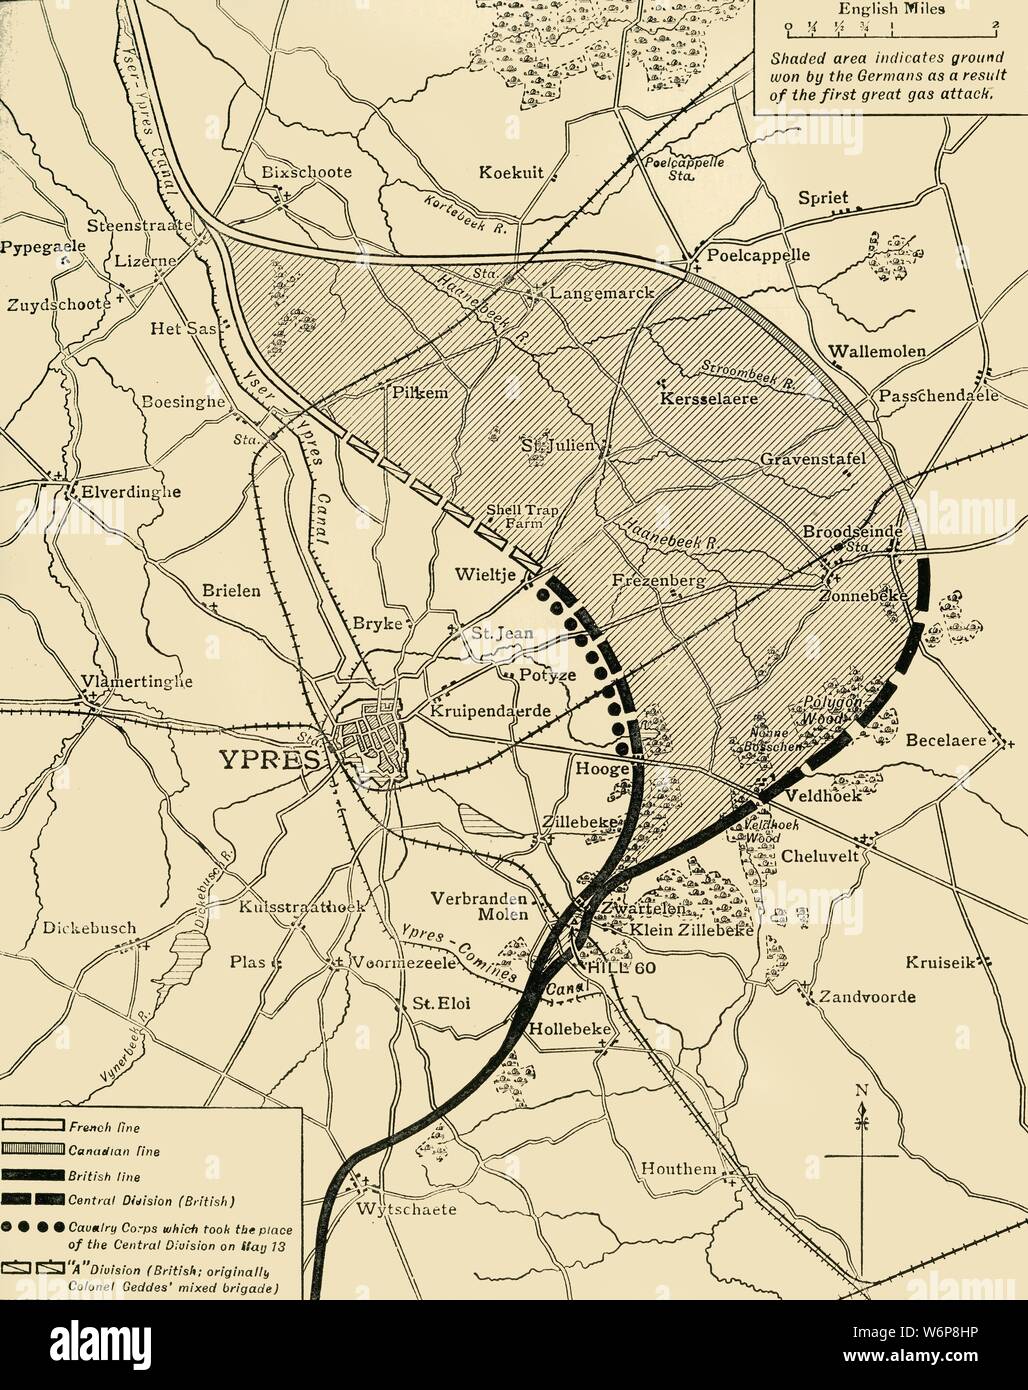 'The Ypres Salient before and after the Second Battle of Ypres, April 22-May 13', First World War, 1915, (c1920). Map showing positions of the allied forces around Ypres in Belgium: French, Canadian and British, the 'Cavalry Corps which took the place of the Central Division on May13', and '&quot;A Division (British; originally Colonel Geddes' mixed brigade)'. The shaded area indicates 'ground won by the Germans as a result of the first great gas attack.' From &quot;The Great World War - A History&quot; Volume III, edited by Frank A Mumby. [The Gresham Publishing Company Ltd, London, c1920] Stock Photo